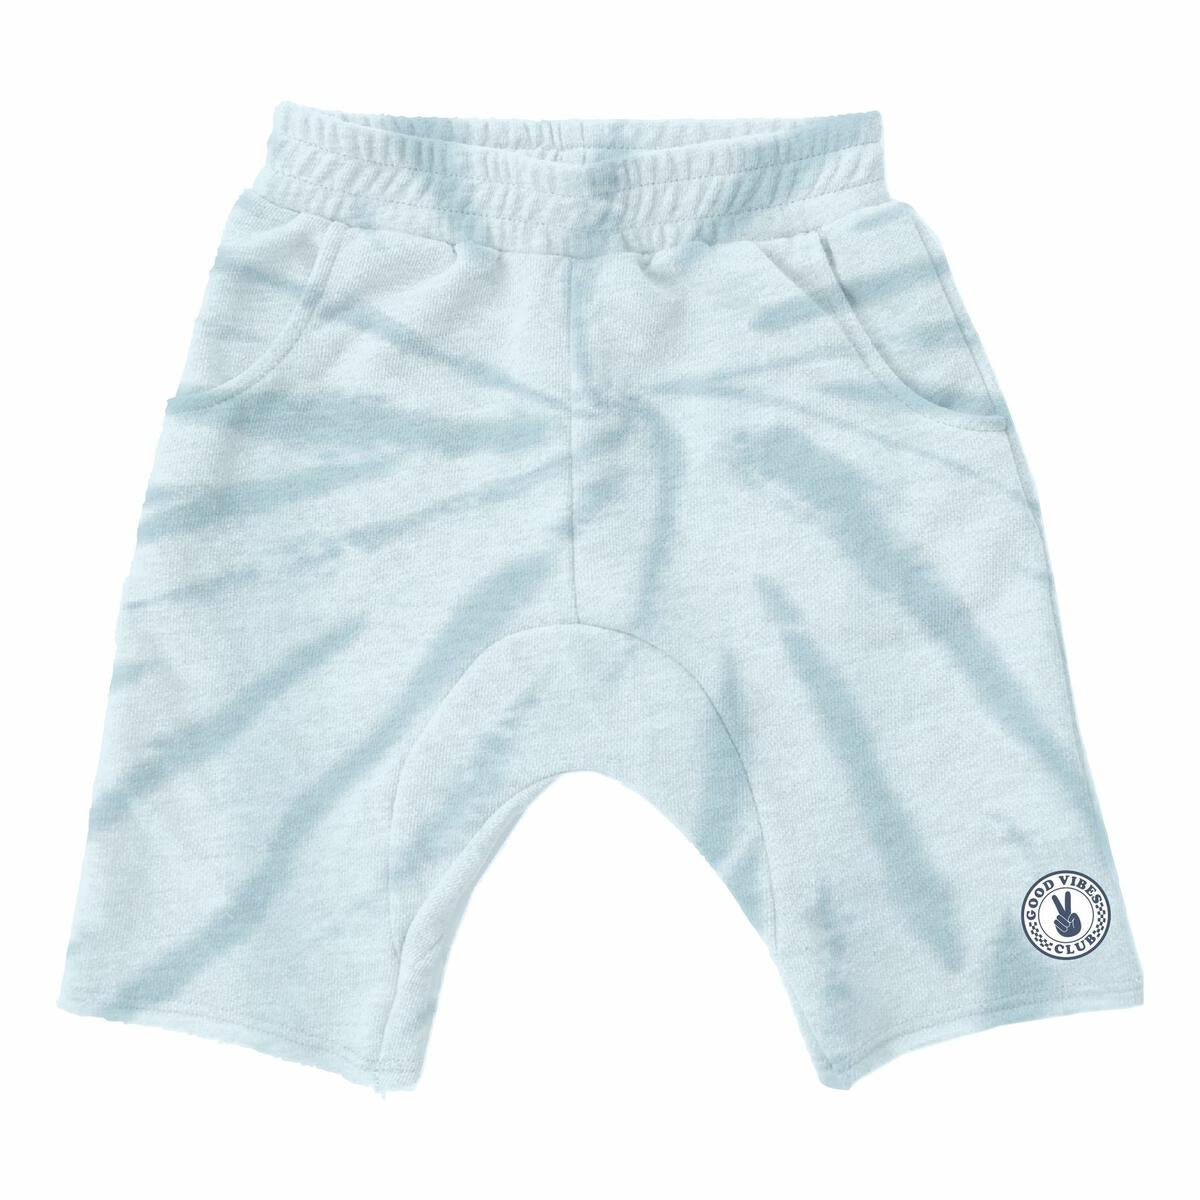 Tiny Whales Good Vibes Club Cozy Boys Shorts - Twinkle Twinkle Little One